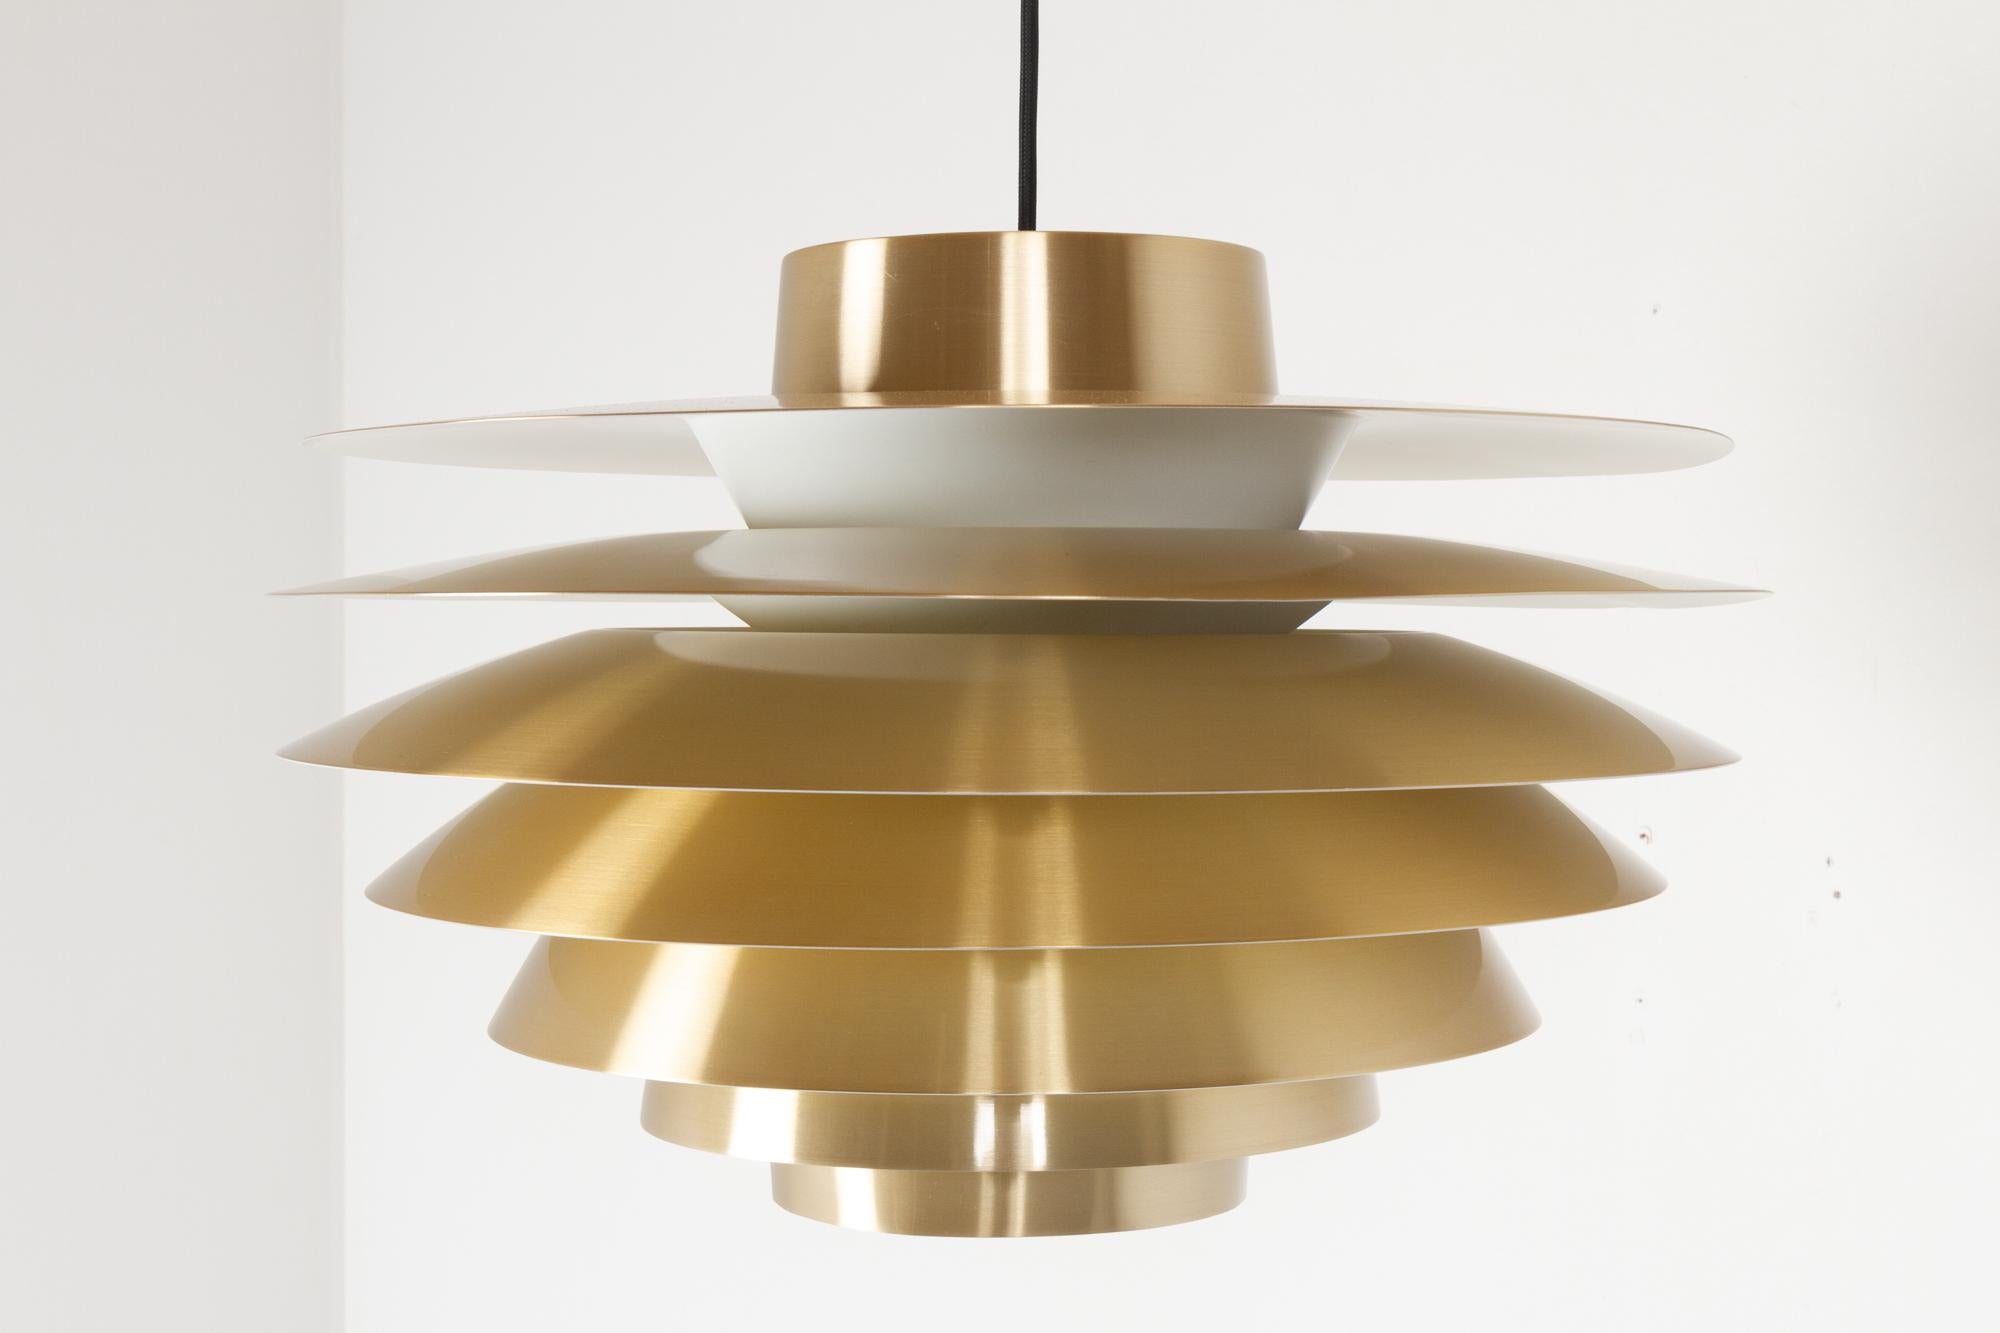 Vintage Danish Verona ceiling pendant by Svend Middelboe for Nordisk Solar, 1970s
Danish mid-century modern brass colored aluminium ceiling lamp designed by Danish lighting designer Svend Middelboe.
Seven shades disperses the light evenly without